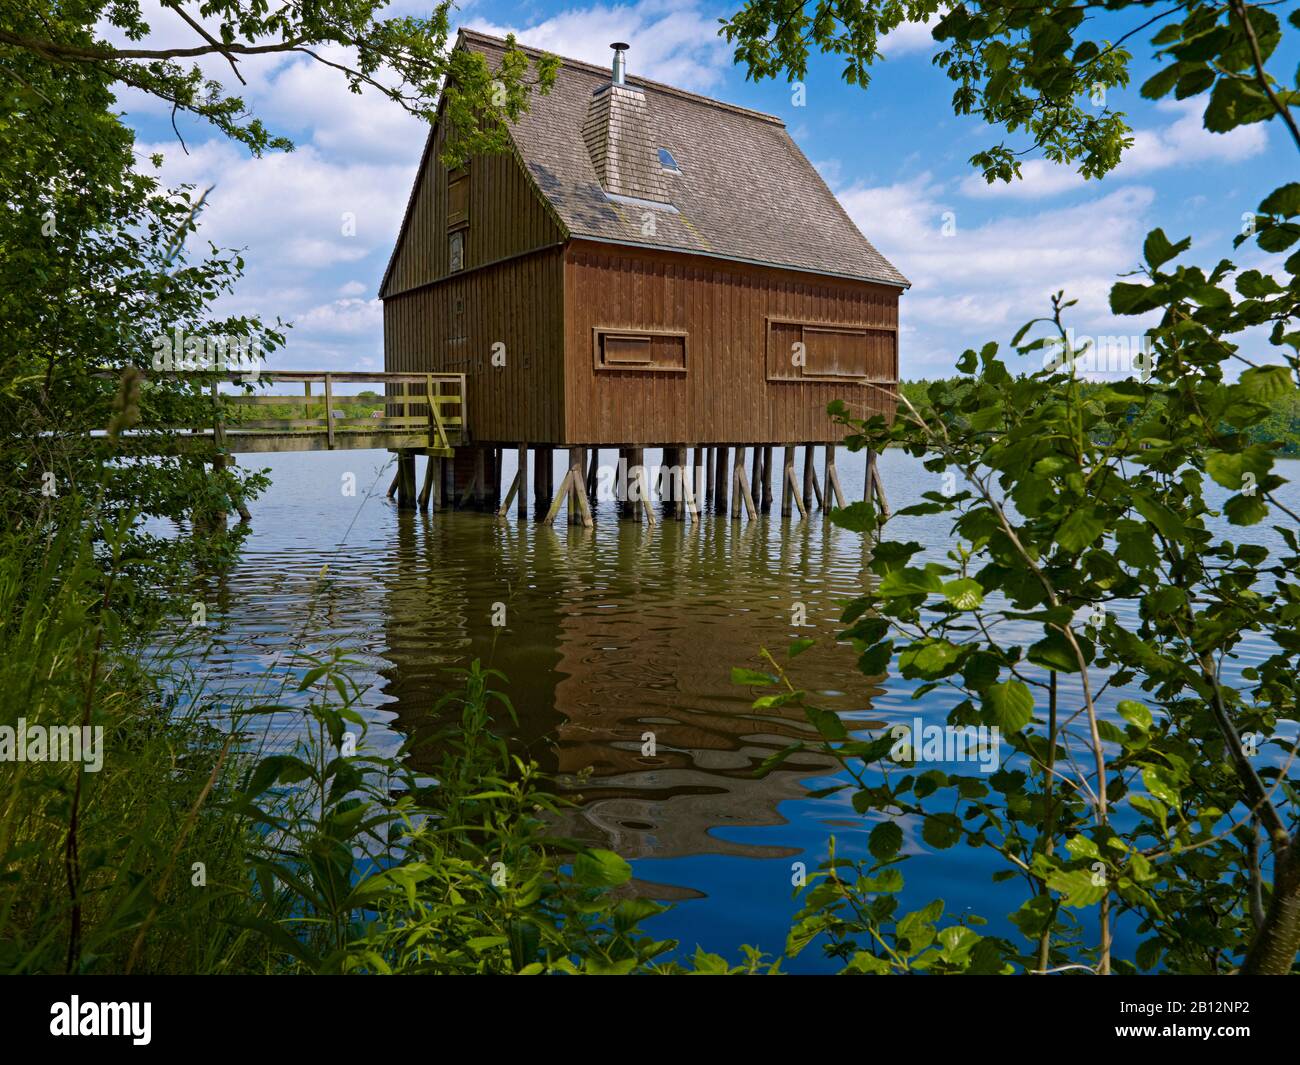 Stilt house in the Hausteich,Plothener Teiche,Thuringia,Germany Stock Photo